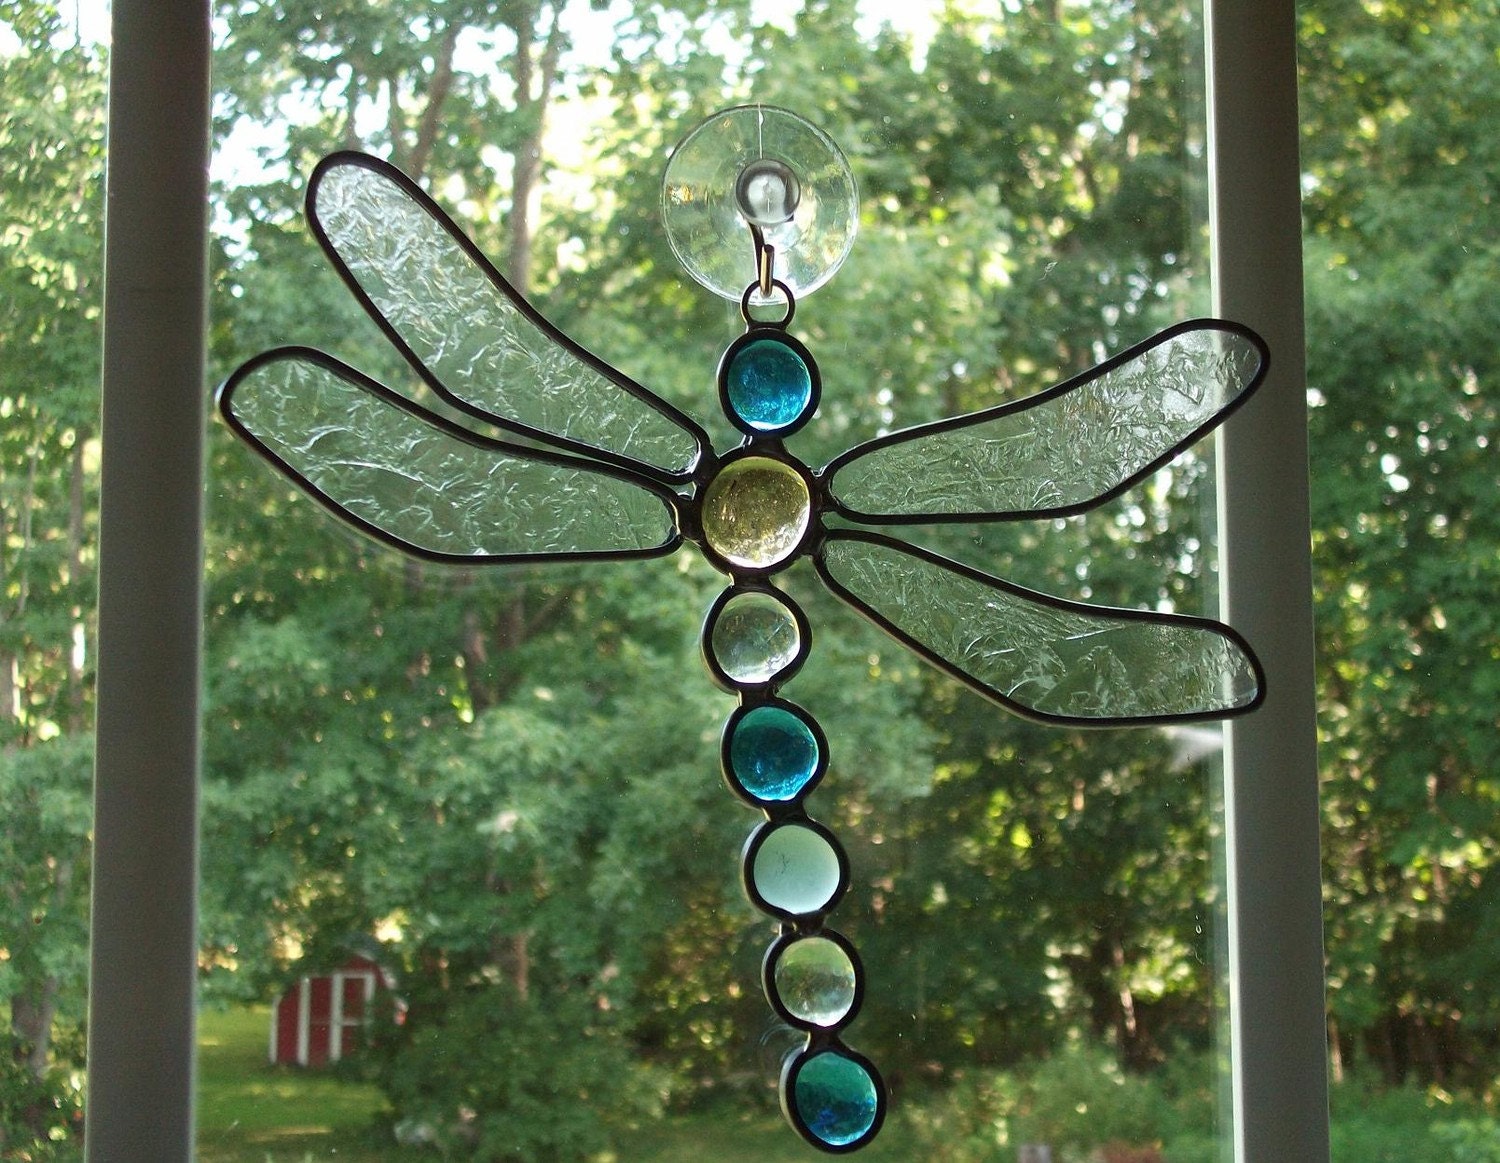 Popular items for dragonfly home decor on Etsy